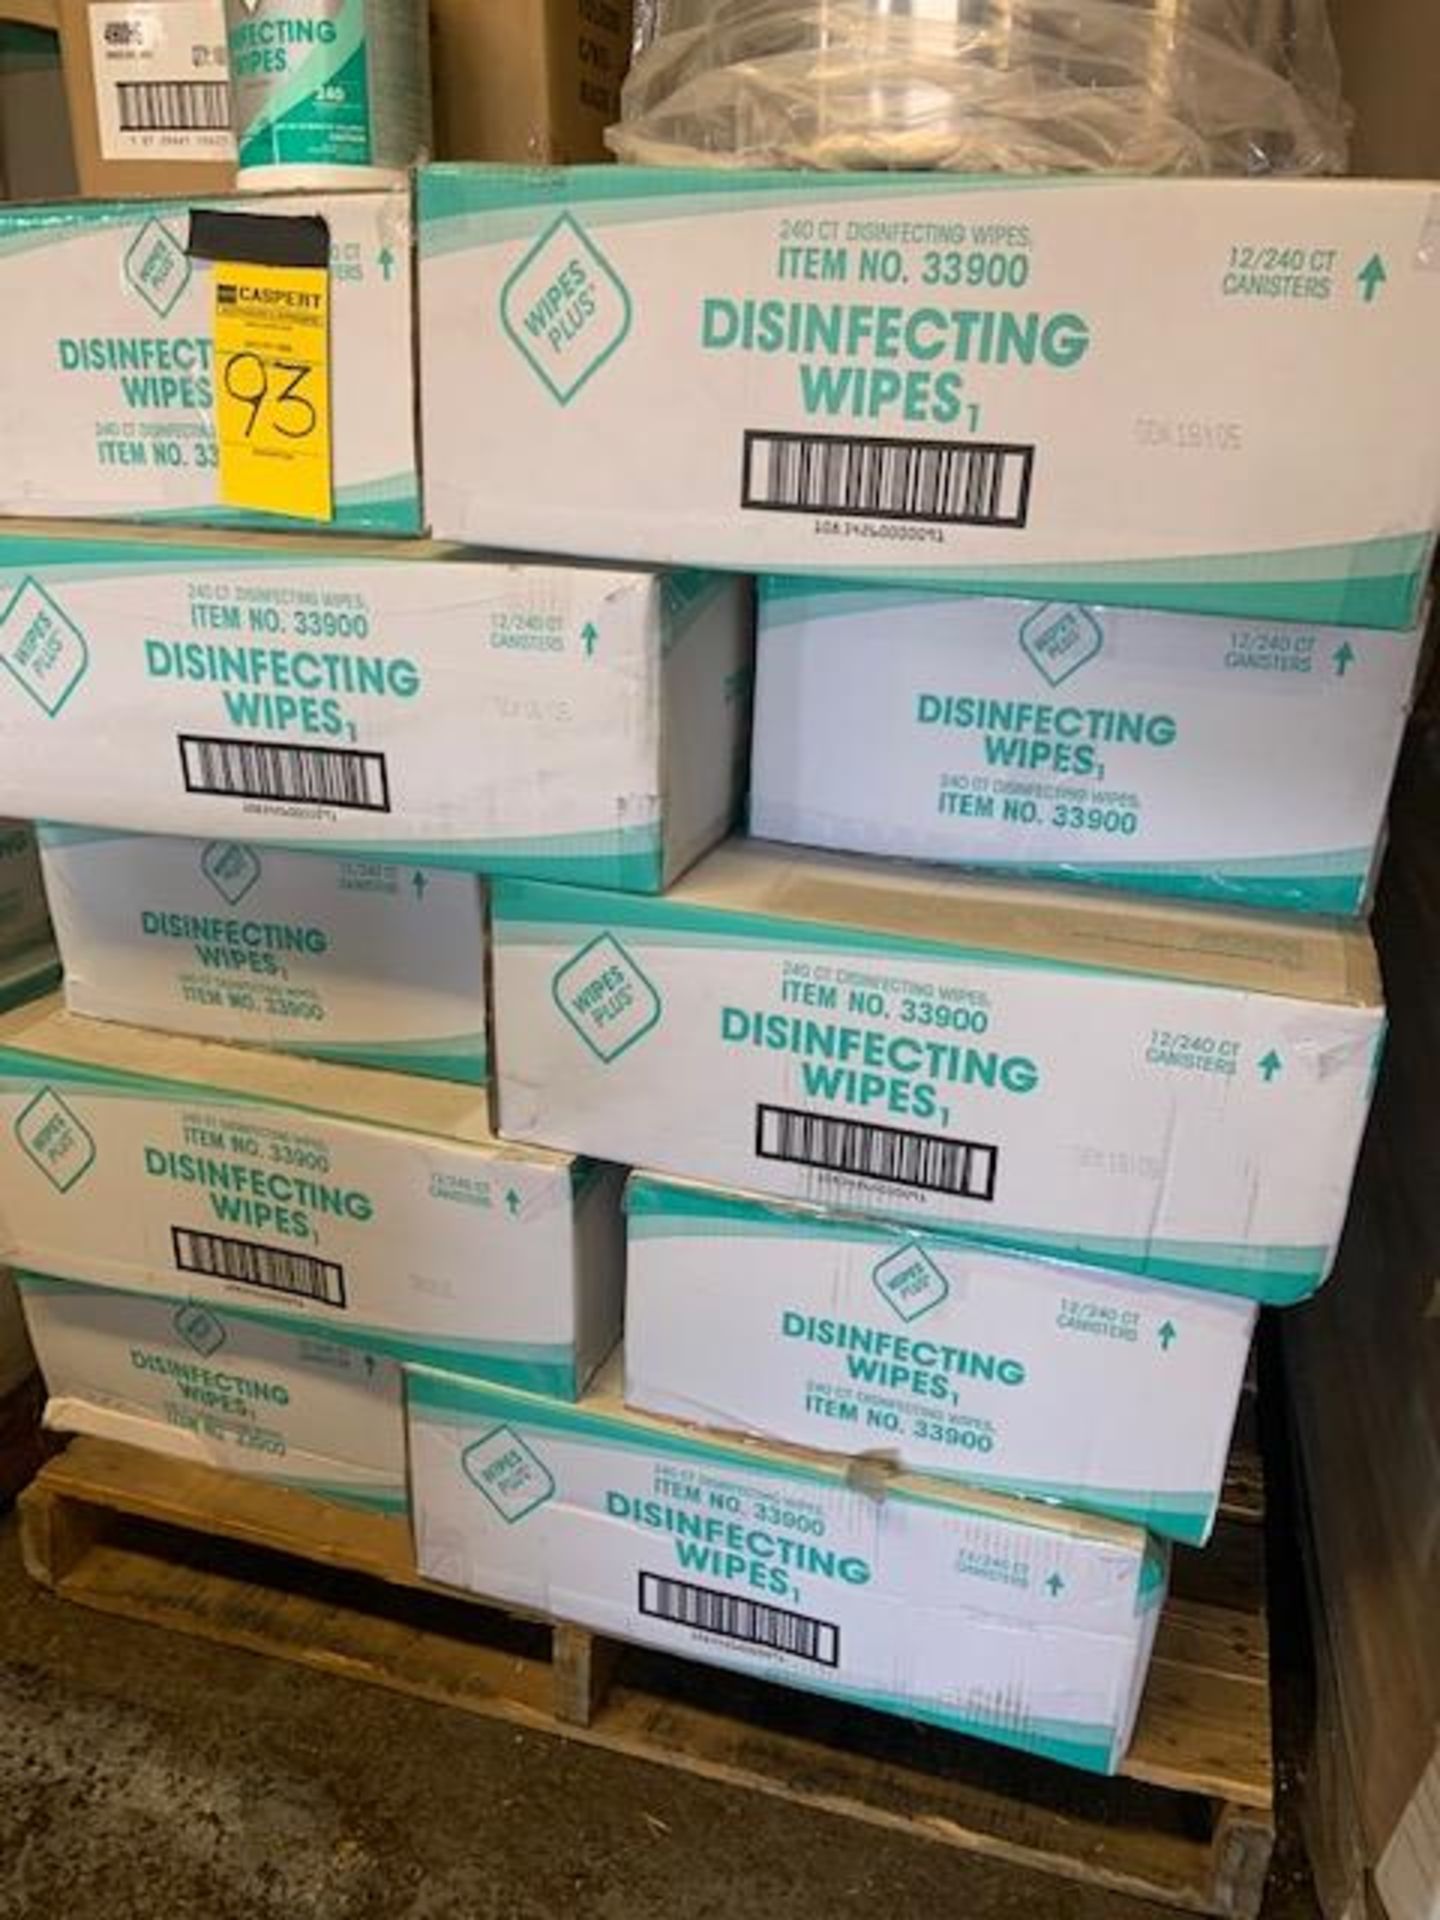 (60) 240 Count Disinfecting Wipes - Image 2 of 2